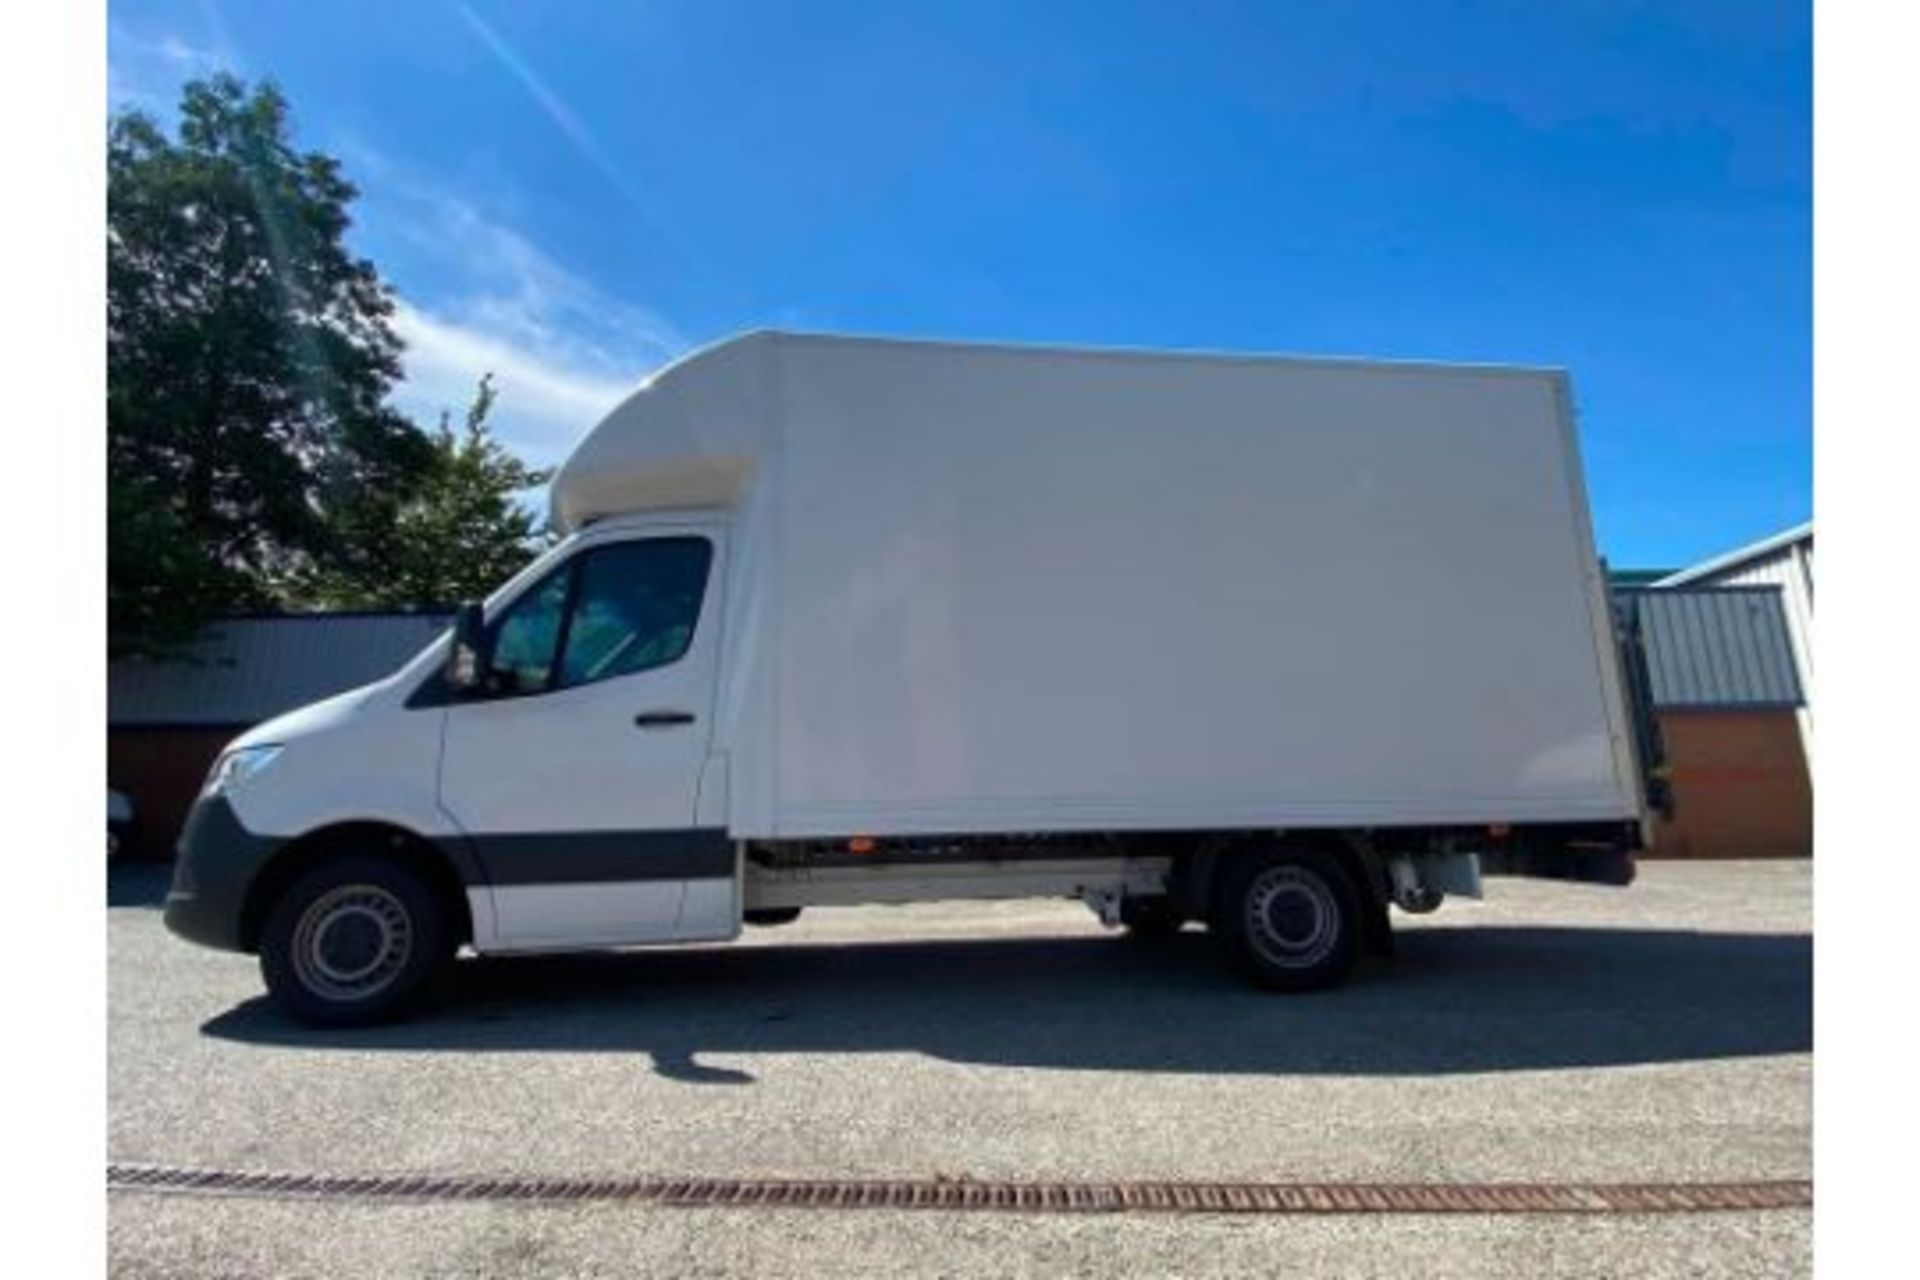 Mercedes Sprinter 314Cdi LWB Luton Body with TL - 2020 20 Reg 1 Owner - New Shape - Image 4 of 8